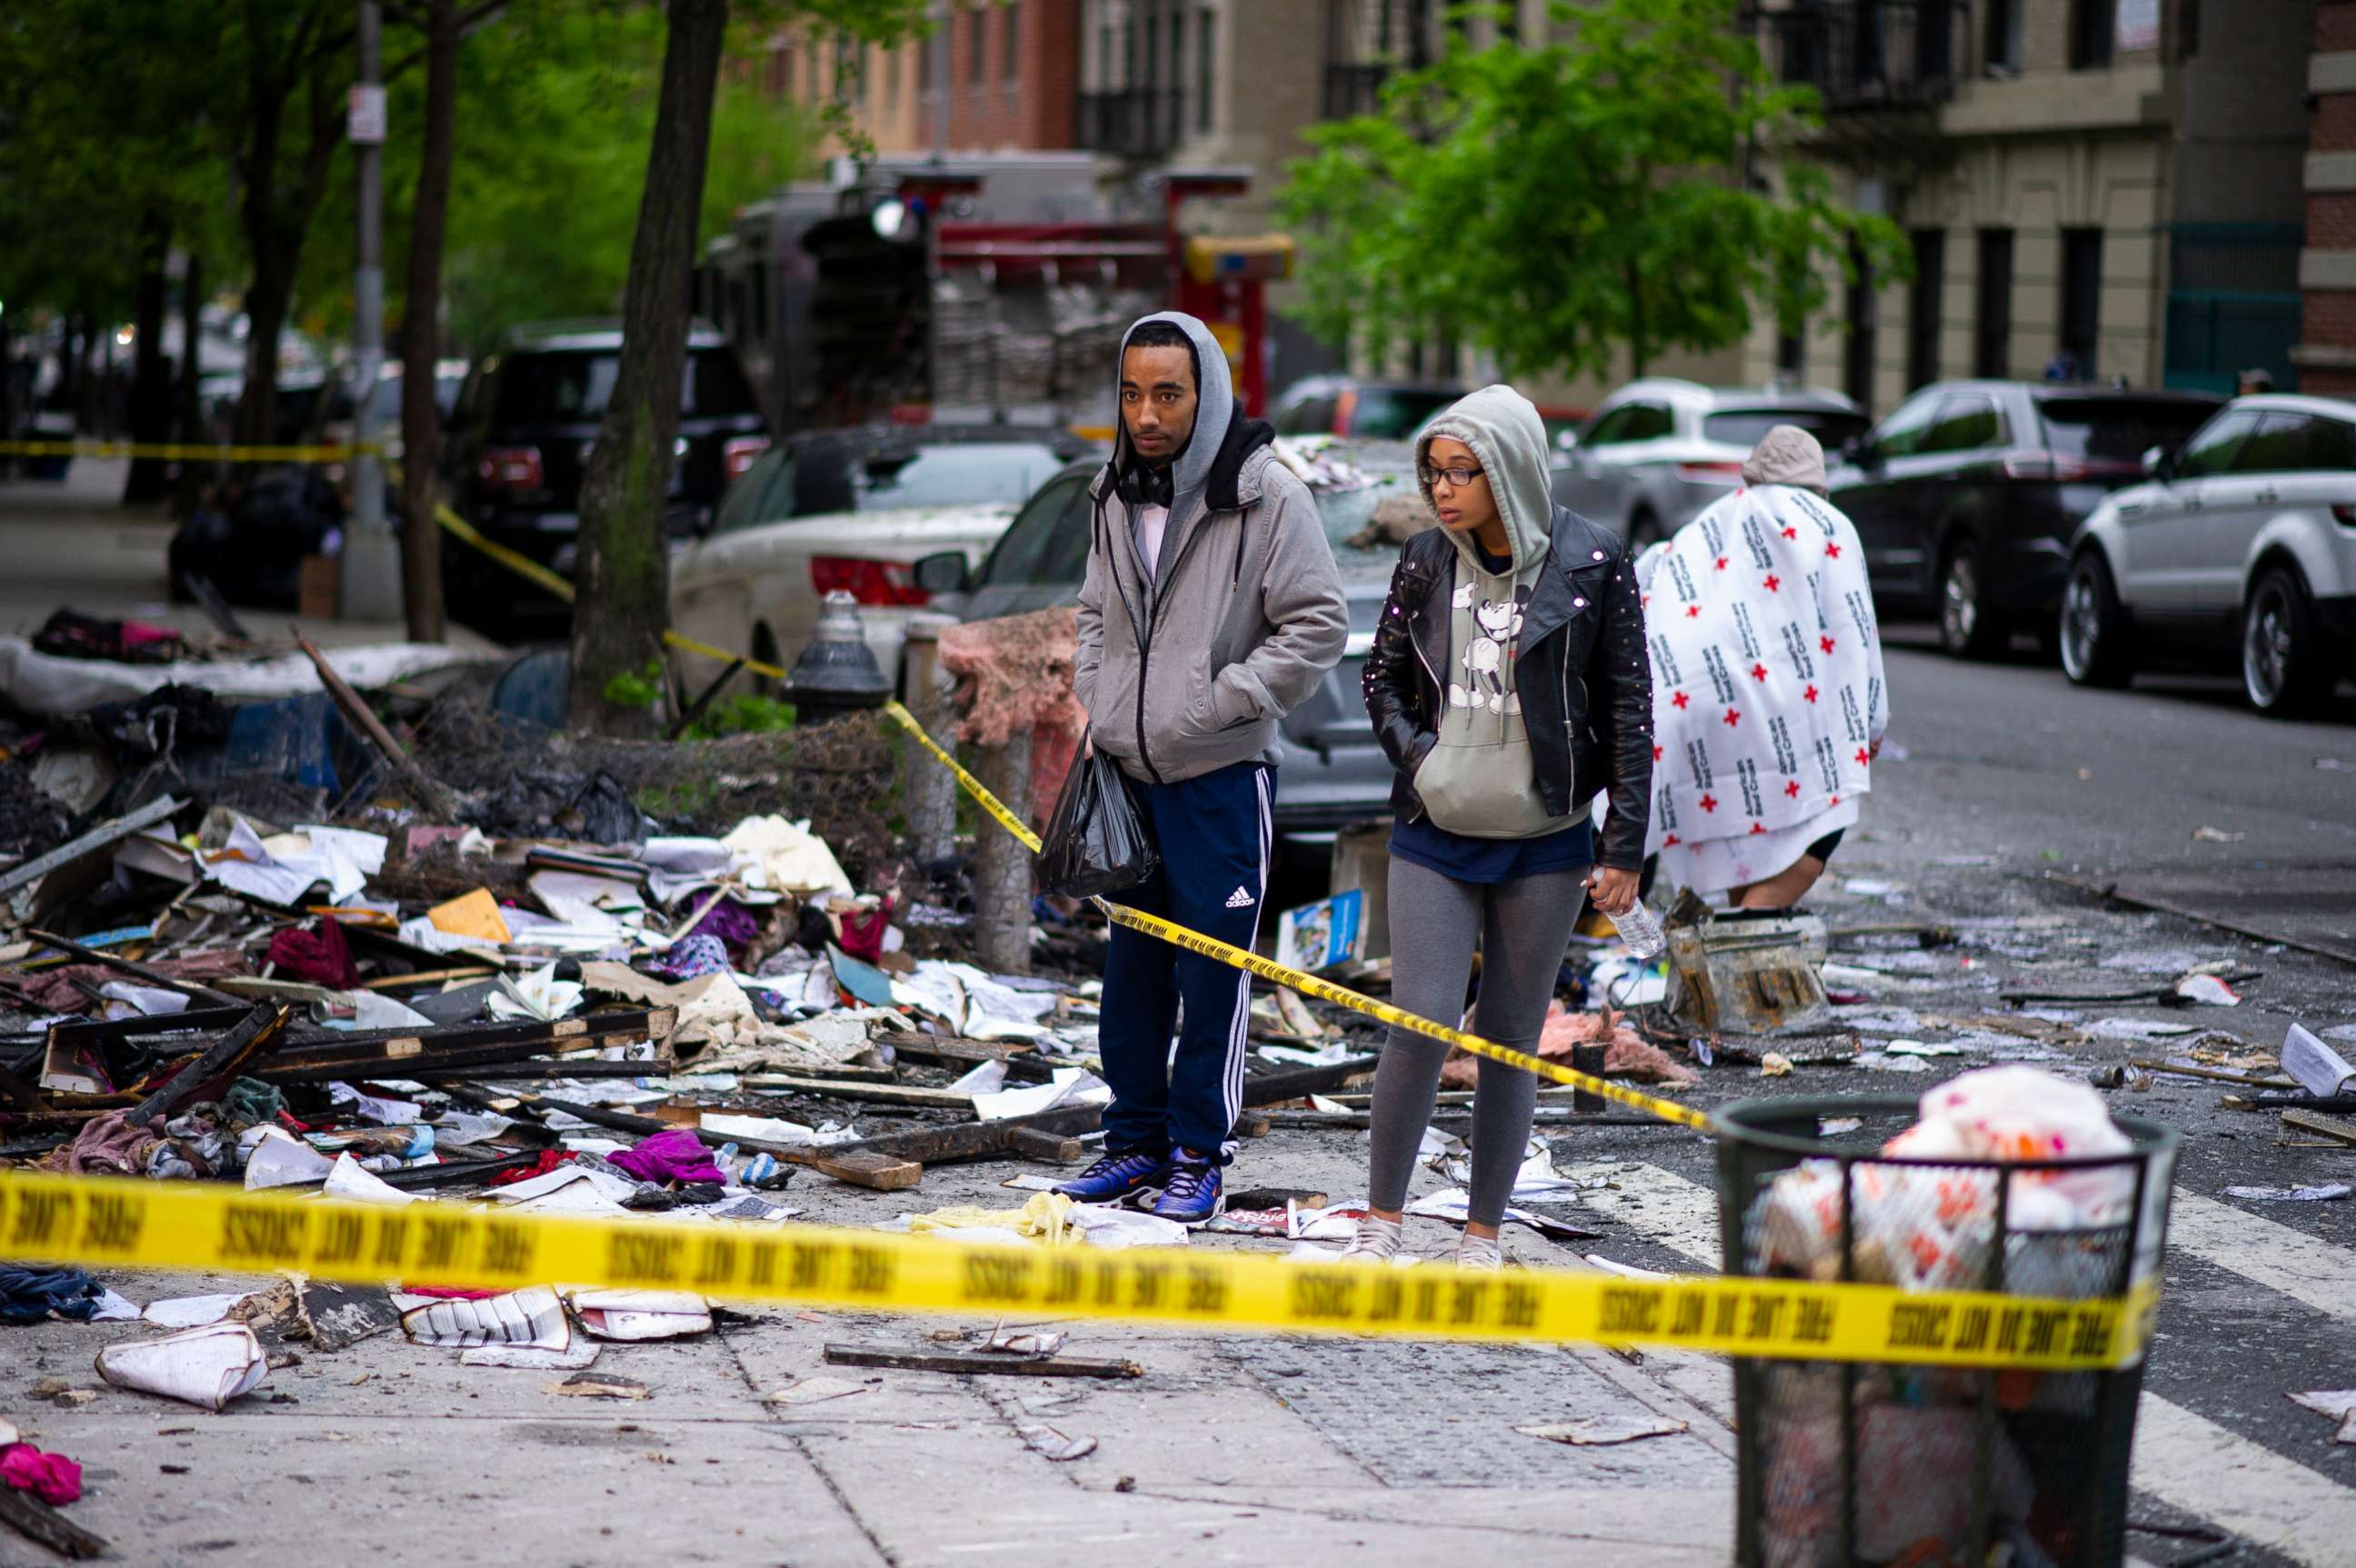 PHOTO: People stand near debris after a fatal fire where six people, including four children, died in a city-owned building in the Harlem neighborhood of New York, May 8, 2019.